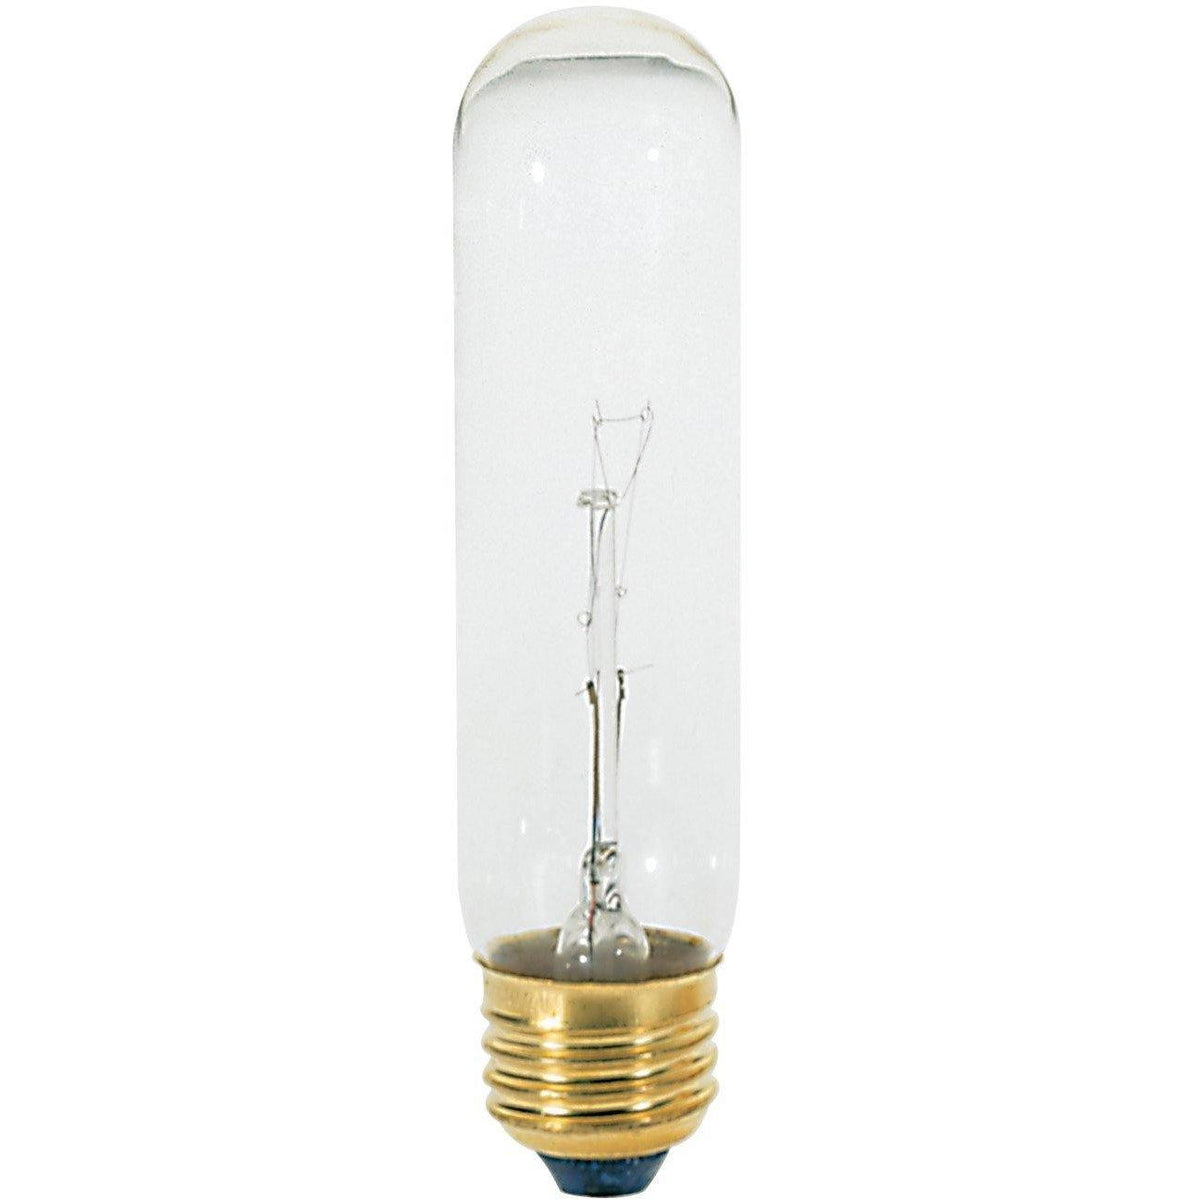 Satco Products - 40 Watt T10 Incandescent, Clear, 2000 Average rated hours, 280 Lumens, Medium base, 120 Volt - S3252 | Montreal Lighting & Hardware